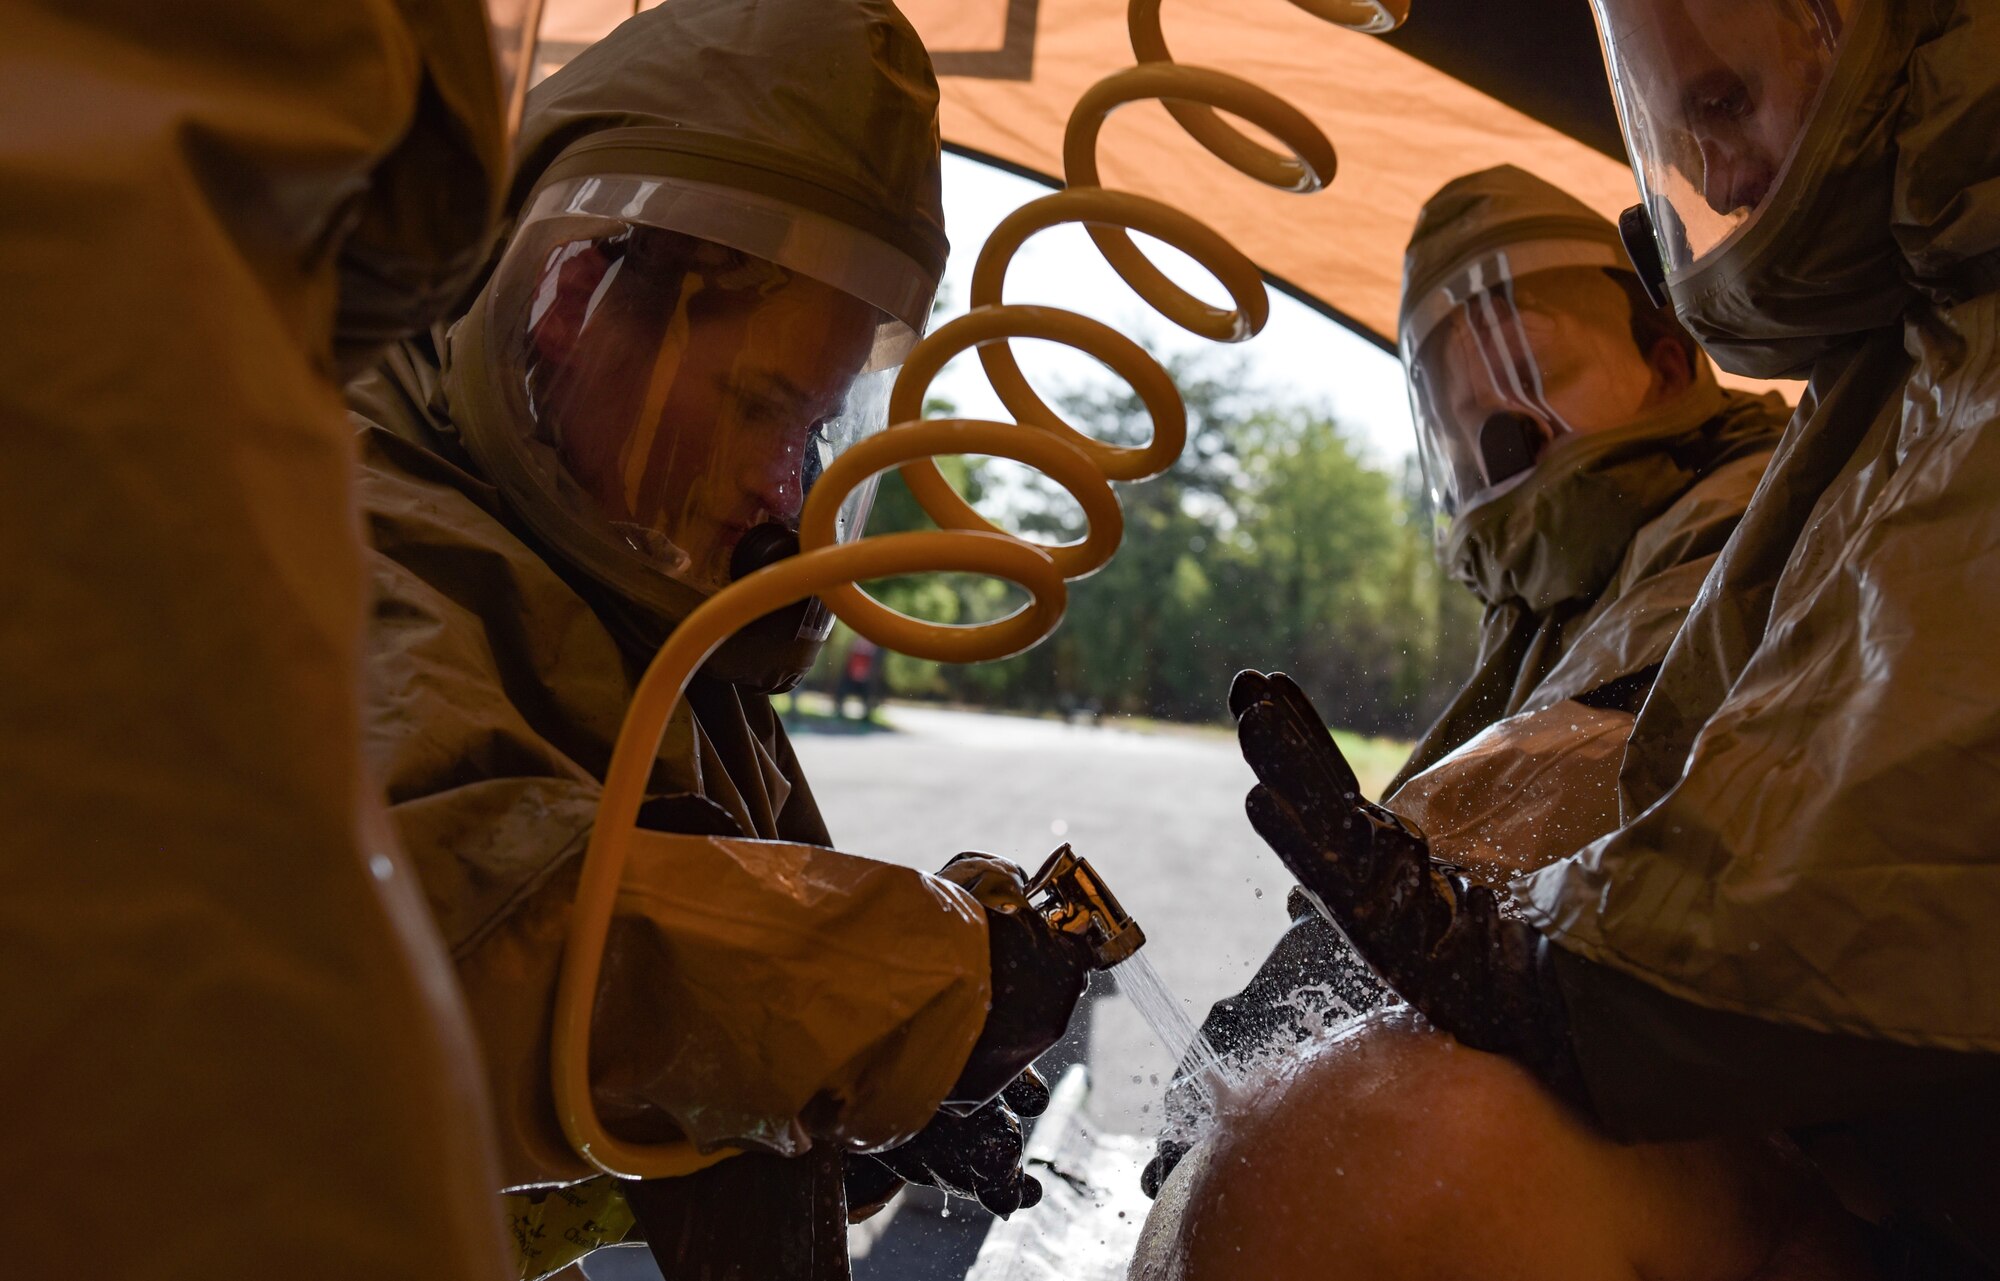 Members of the 92nd Medical Group perform decontamination procedures on a simulated patient during Exercise Ready Eagle at Fairchild Air Force Base, Washington, Aug. 27, 2021.